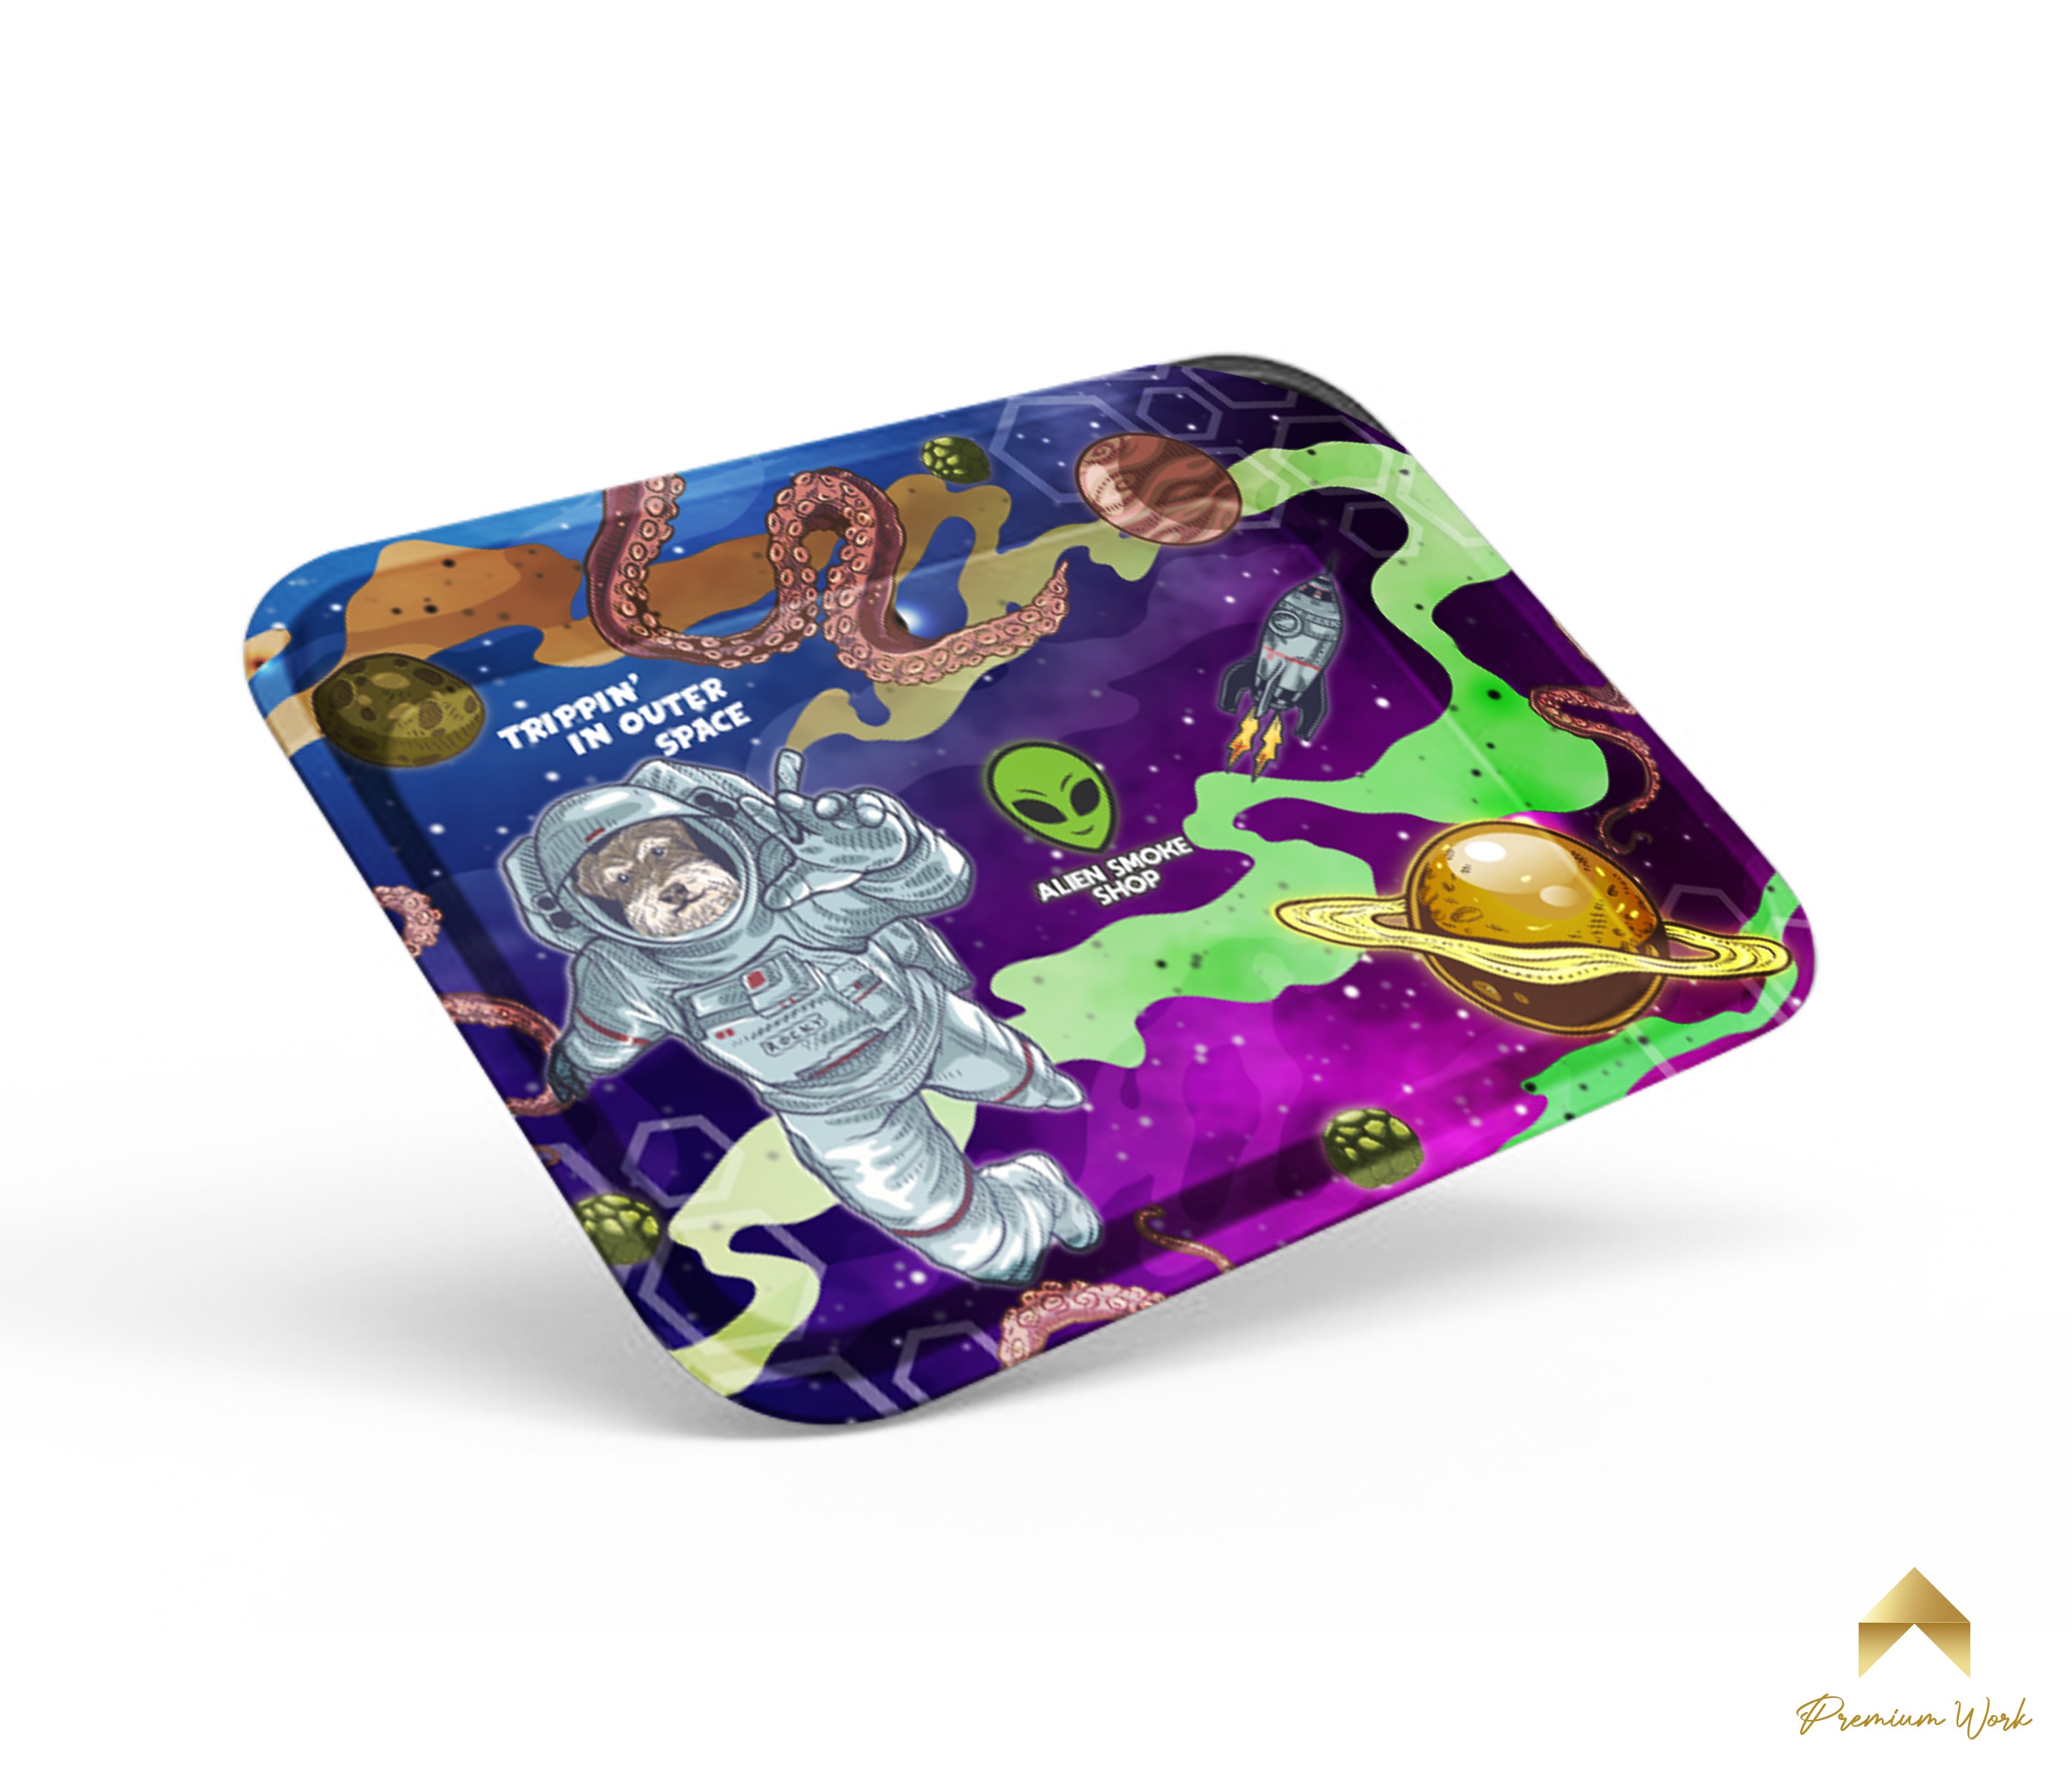 https://whitelabelsource.com/wp-content/uploads/2021/03/ROLLING-TRAY-MOCKUP-1.jpg